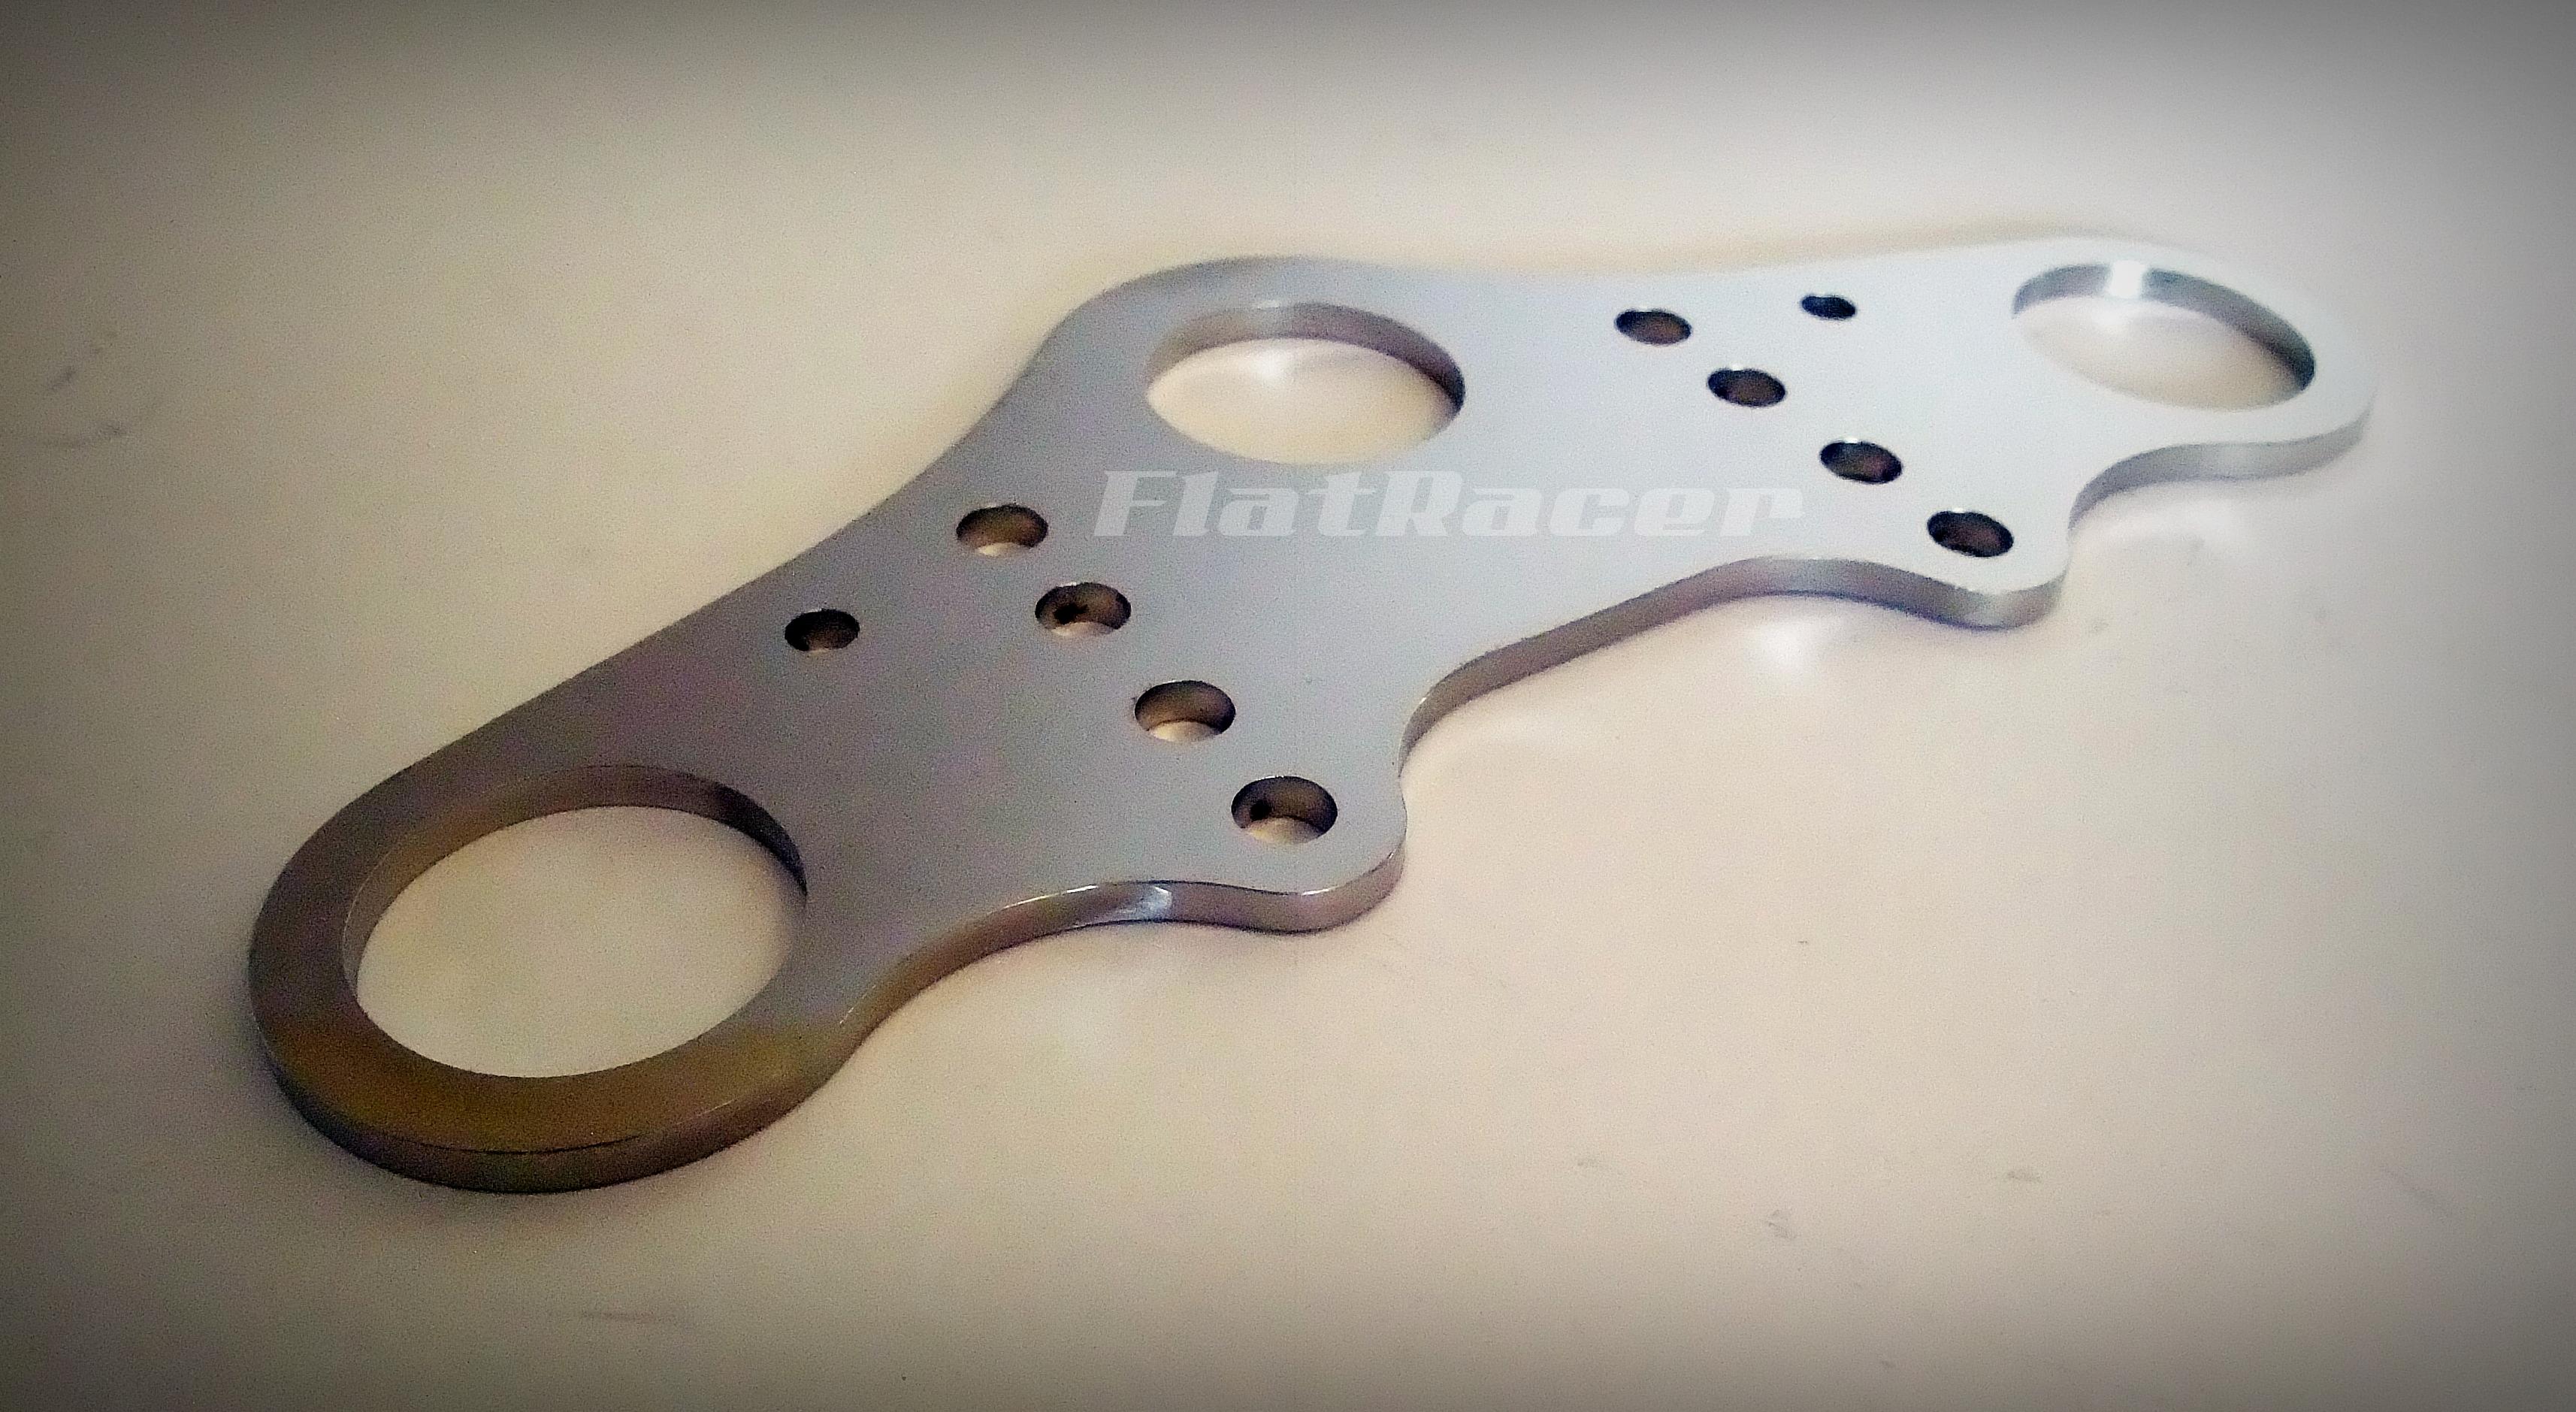 FlatRacer BMW Airhead Boxer Monolever (85-96) stainless steel top yoke plate